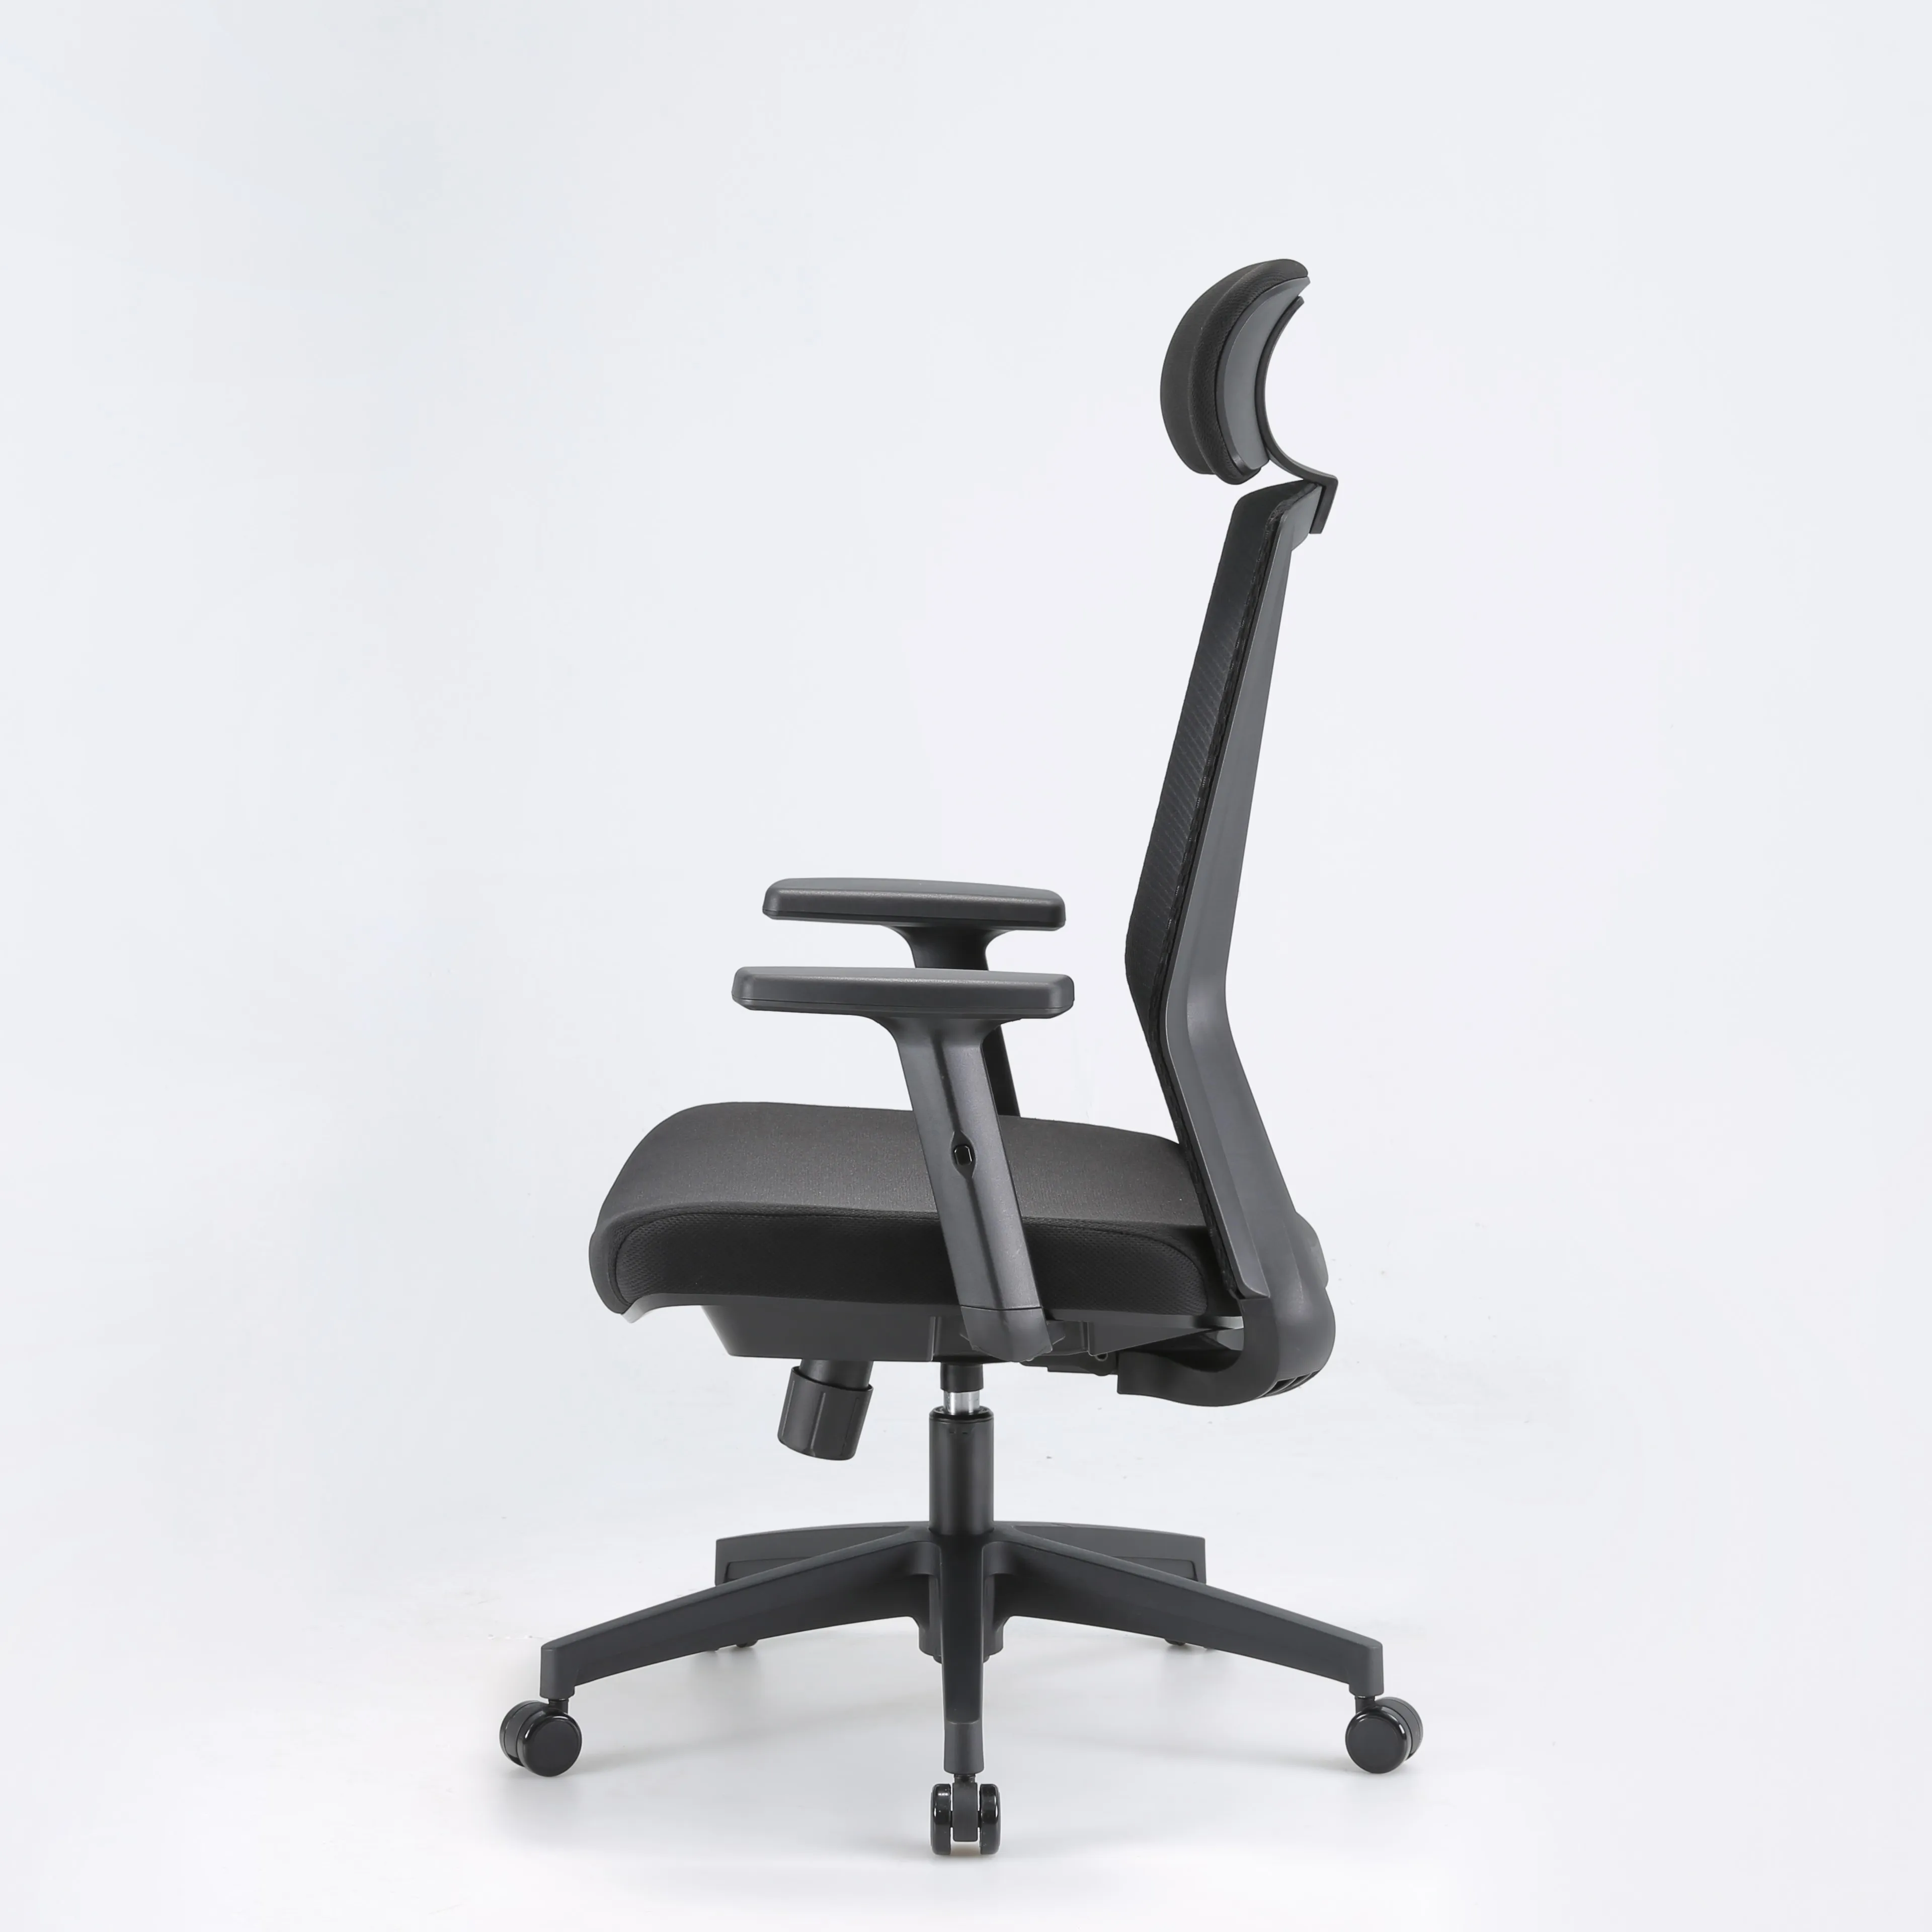 Sihoo Office Ergonomic Desk Chair Mesh Computer Chair With